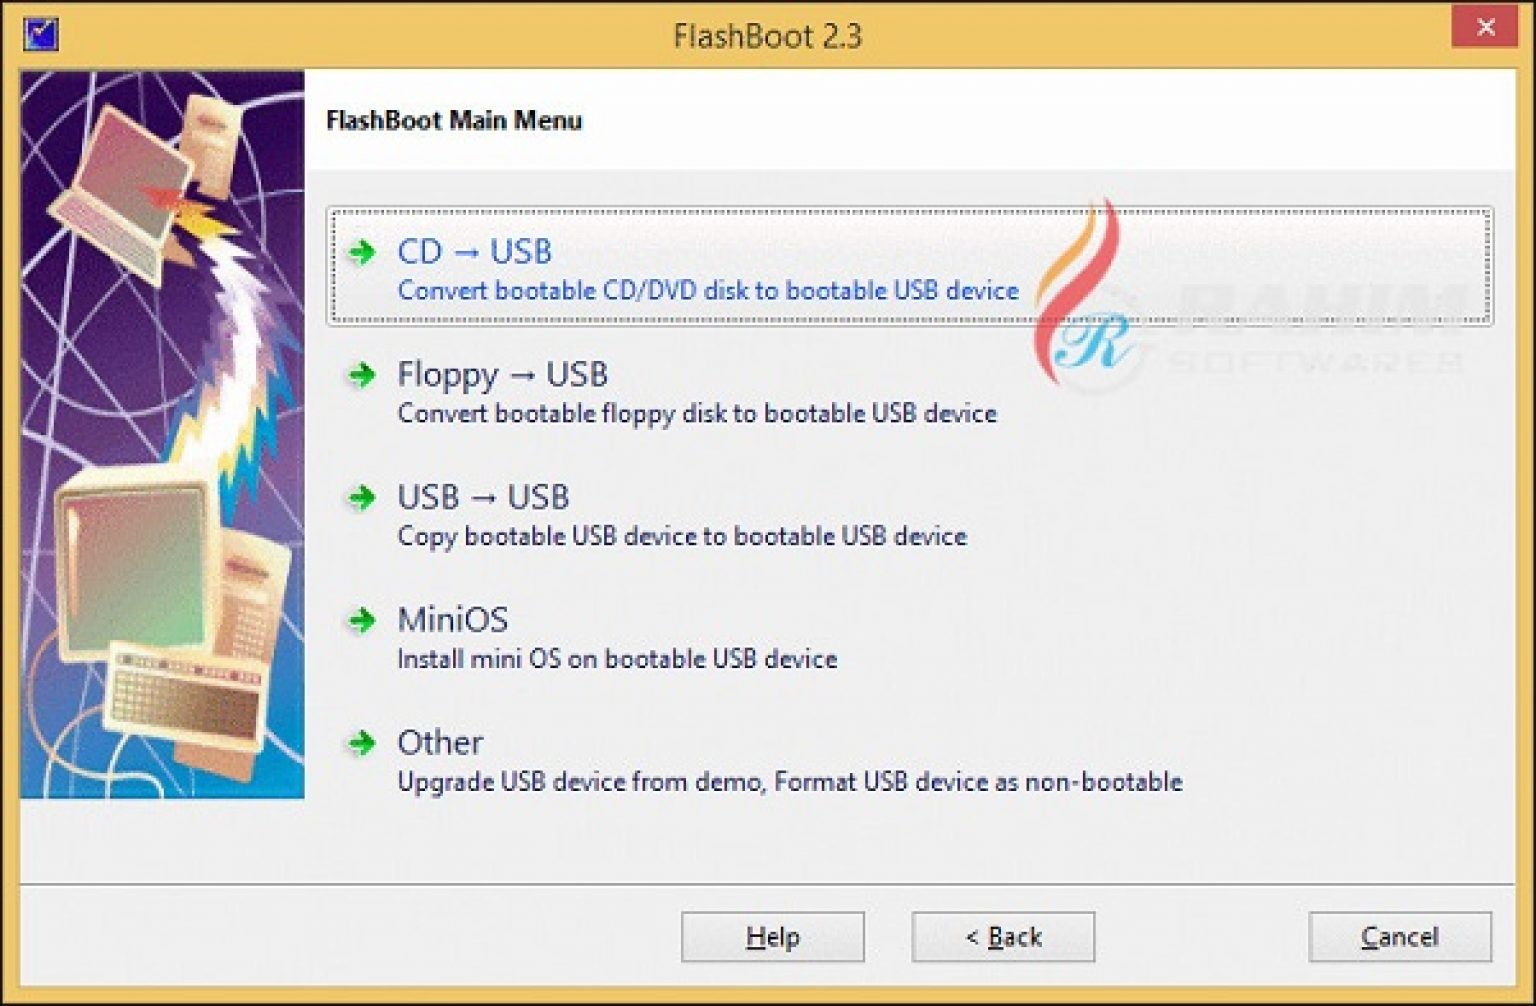 download windows 7 recovery disc iso file